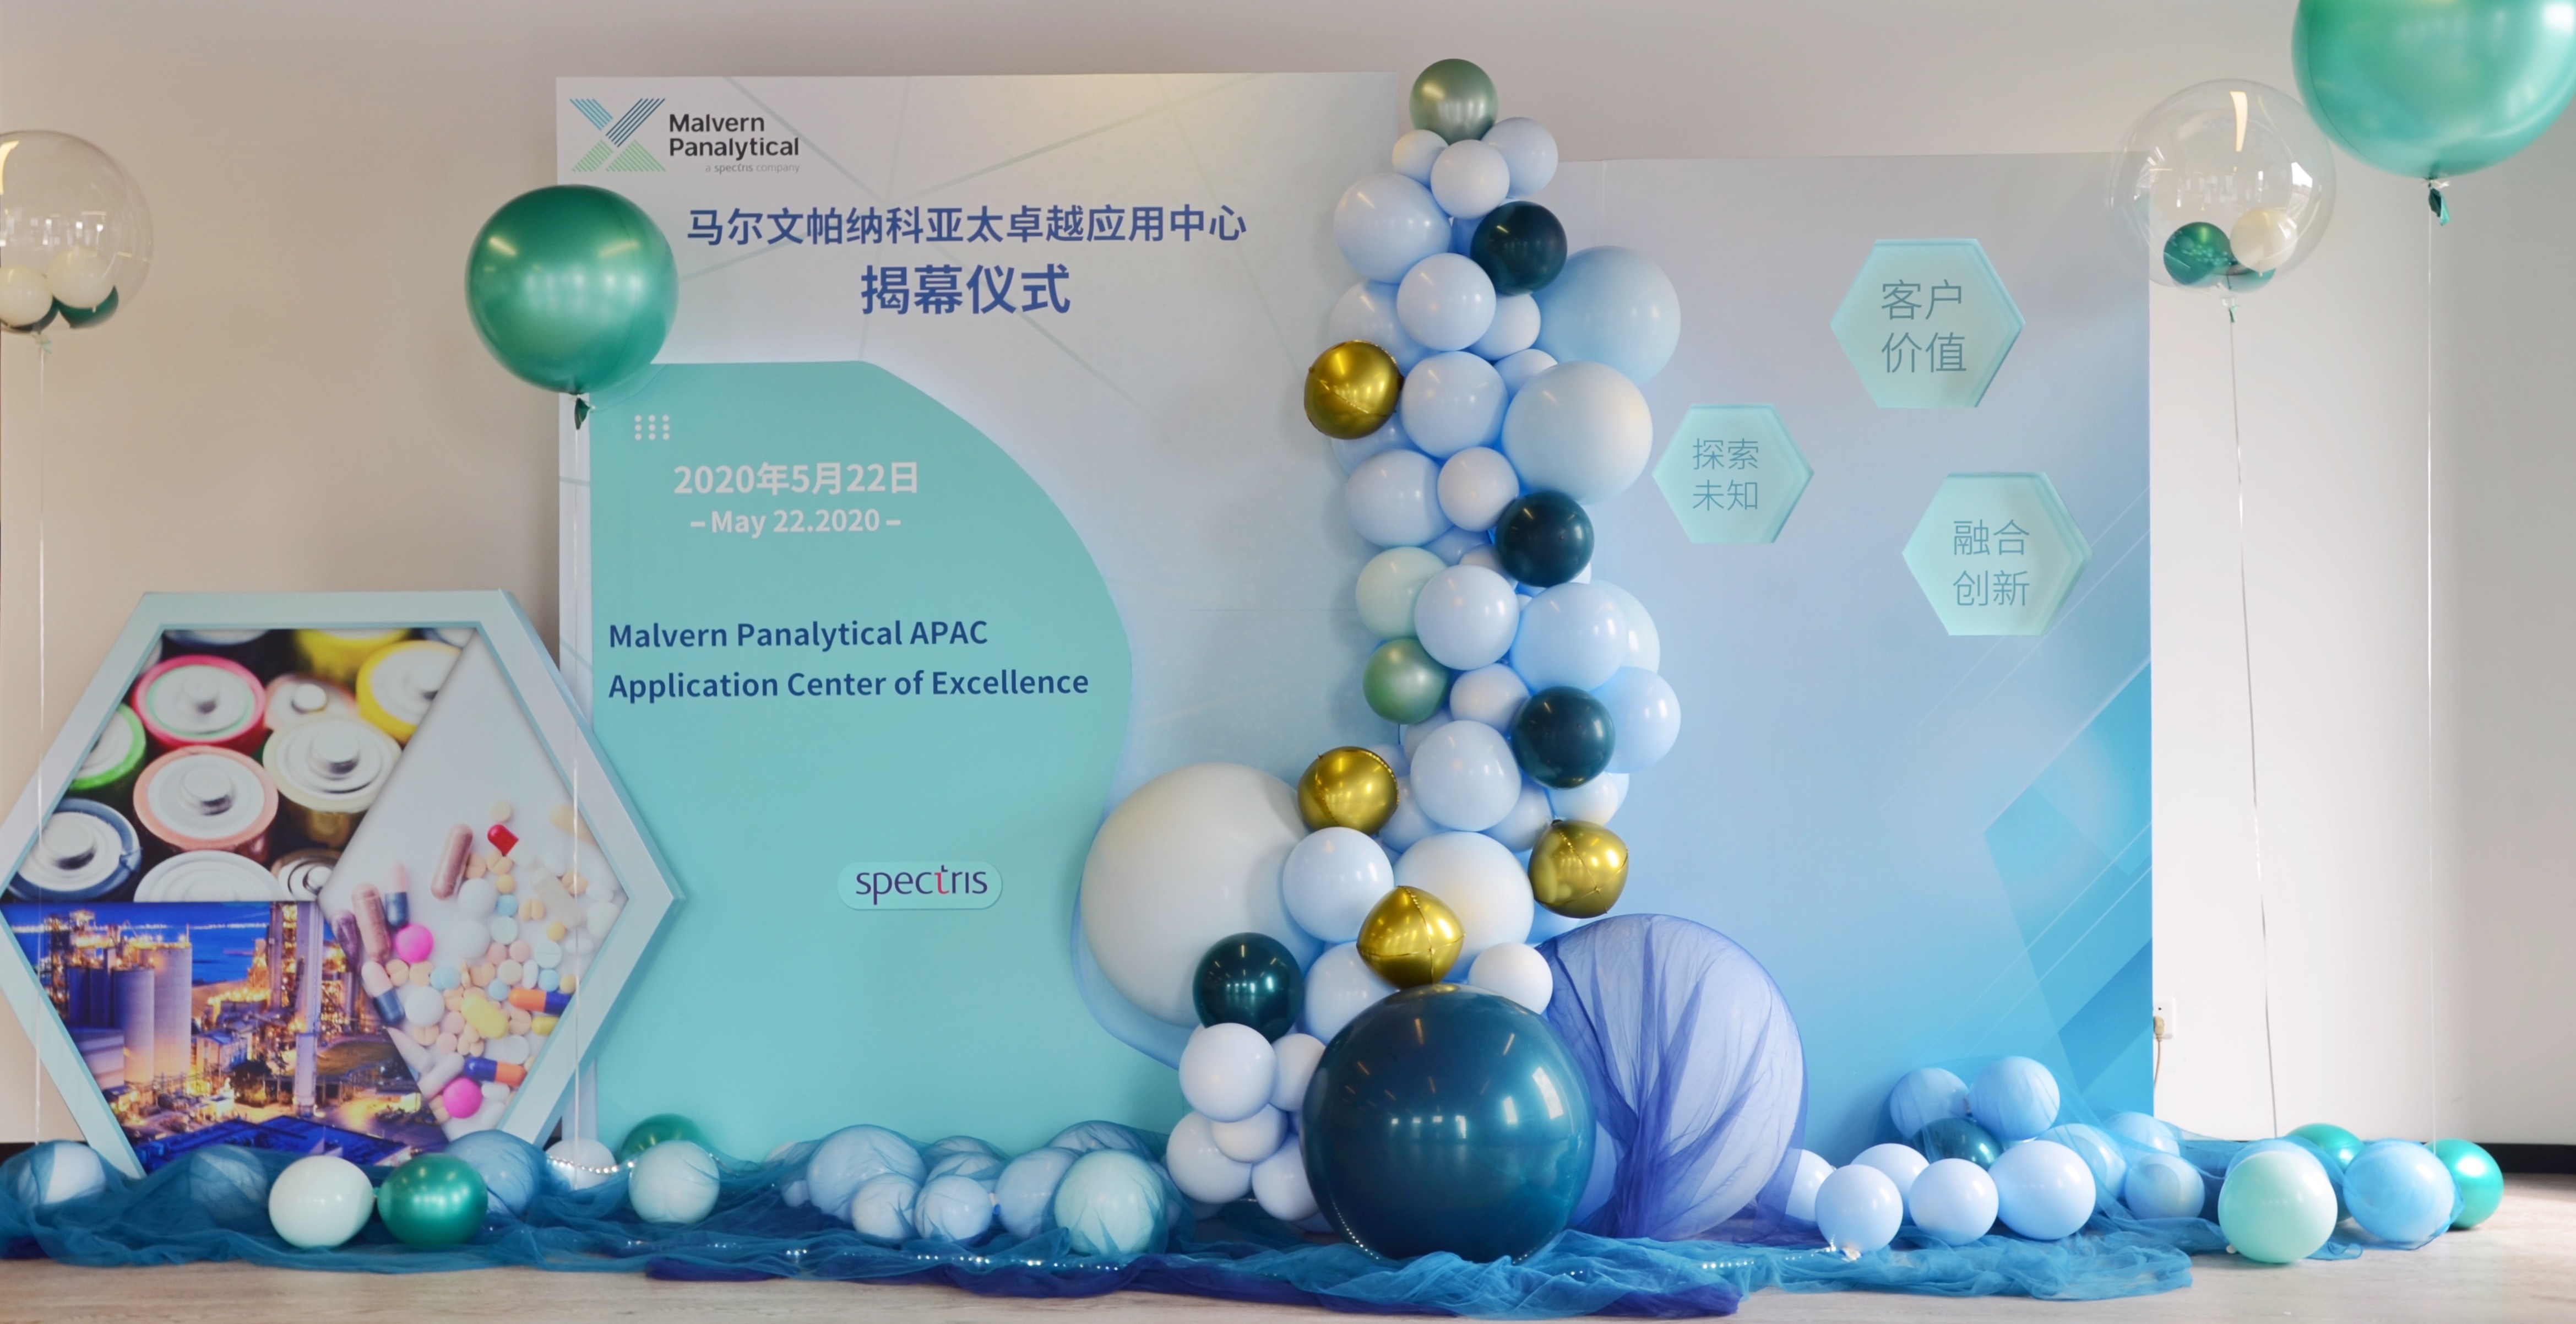 Malvern Panalytical has opened a new application center in Shanghai, China.